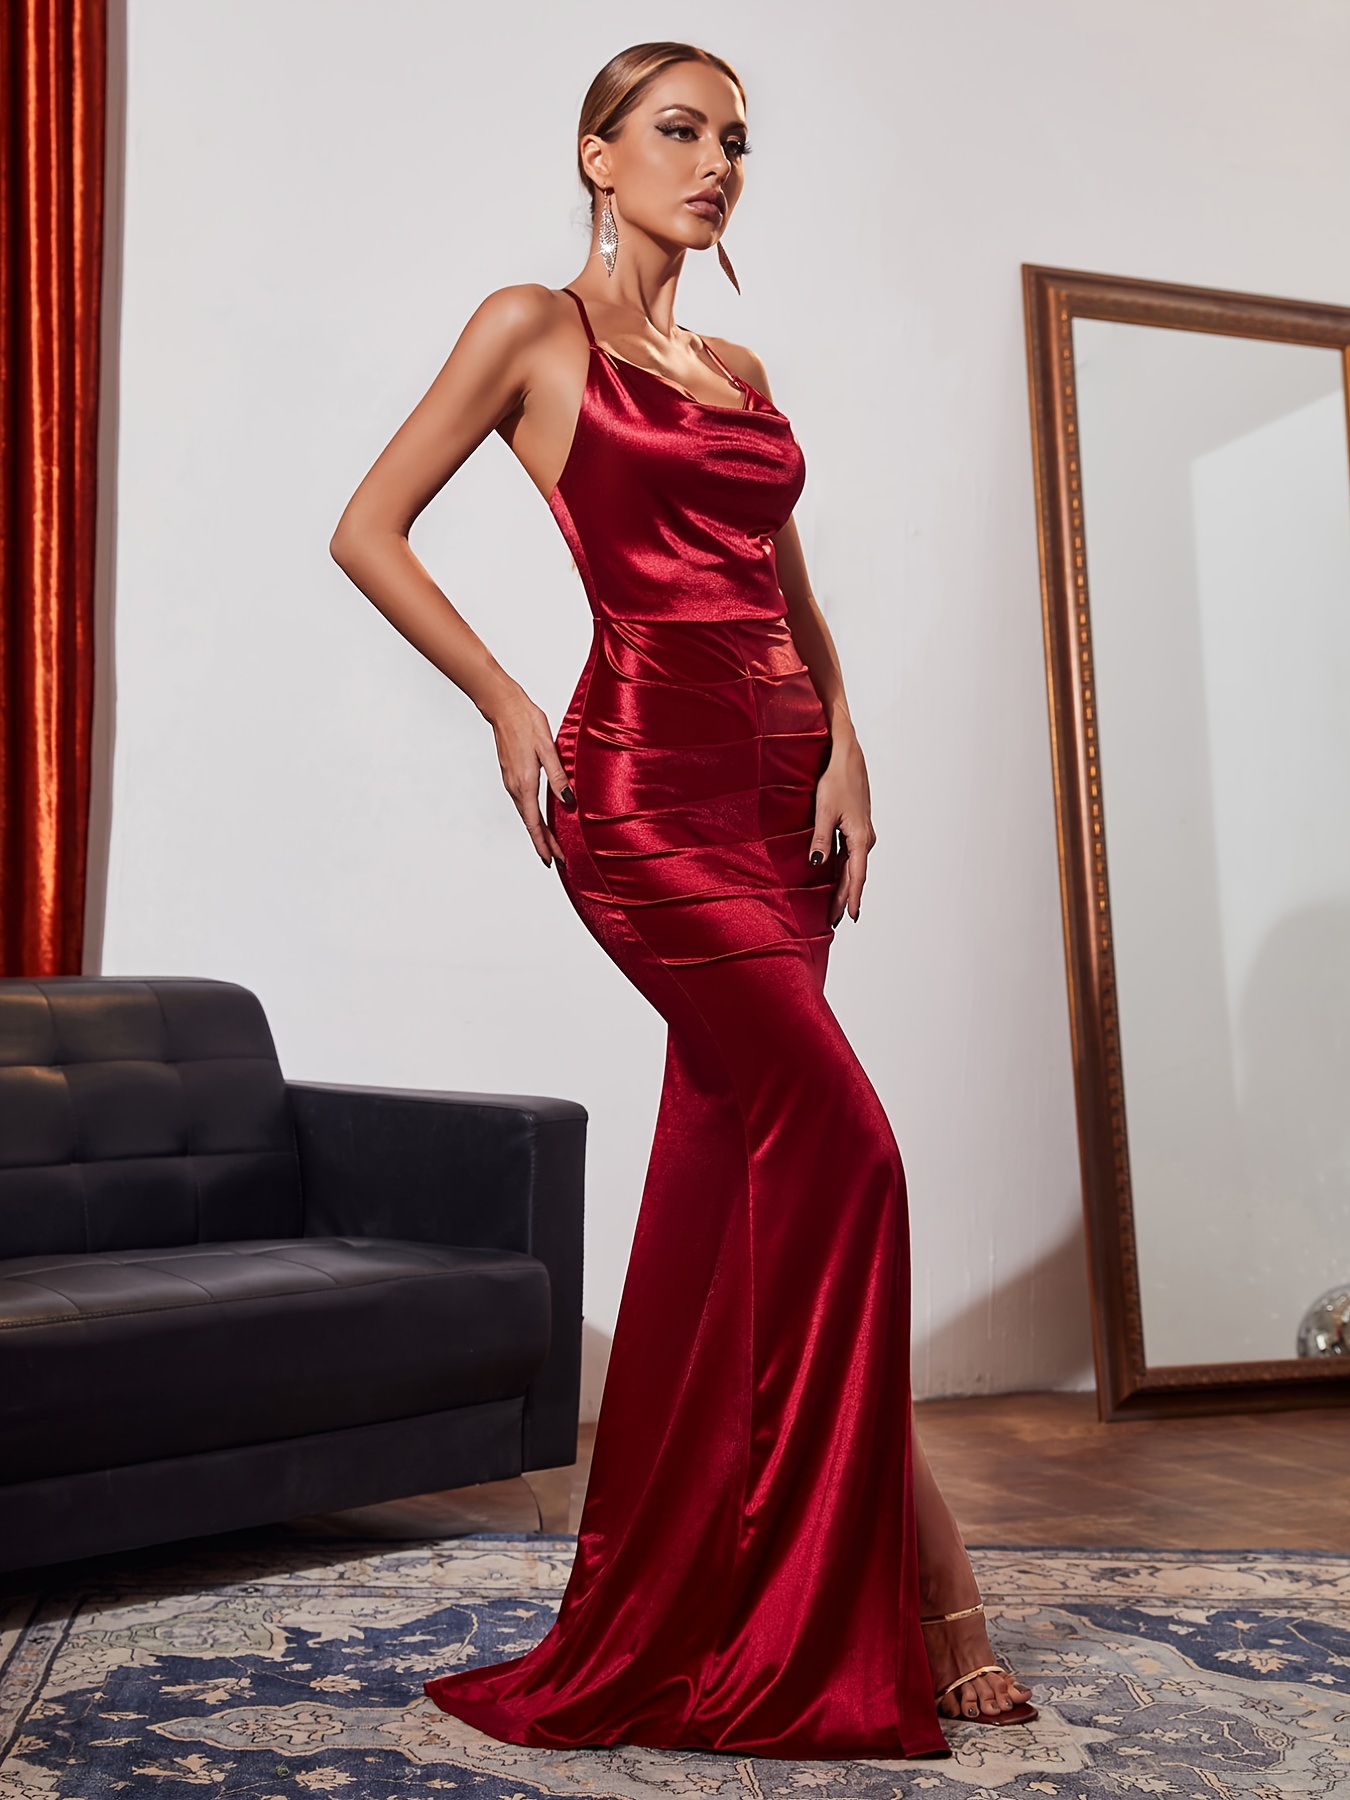 Red Mermaid Satin Cami Dress, Bodycon Evening Party Cocktail Dress